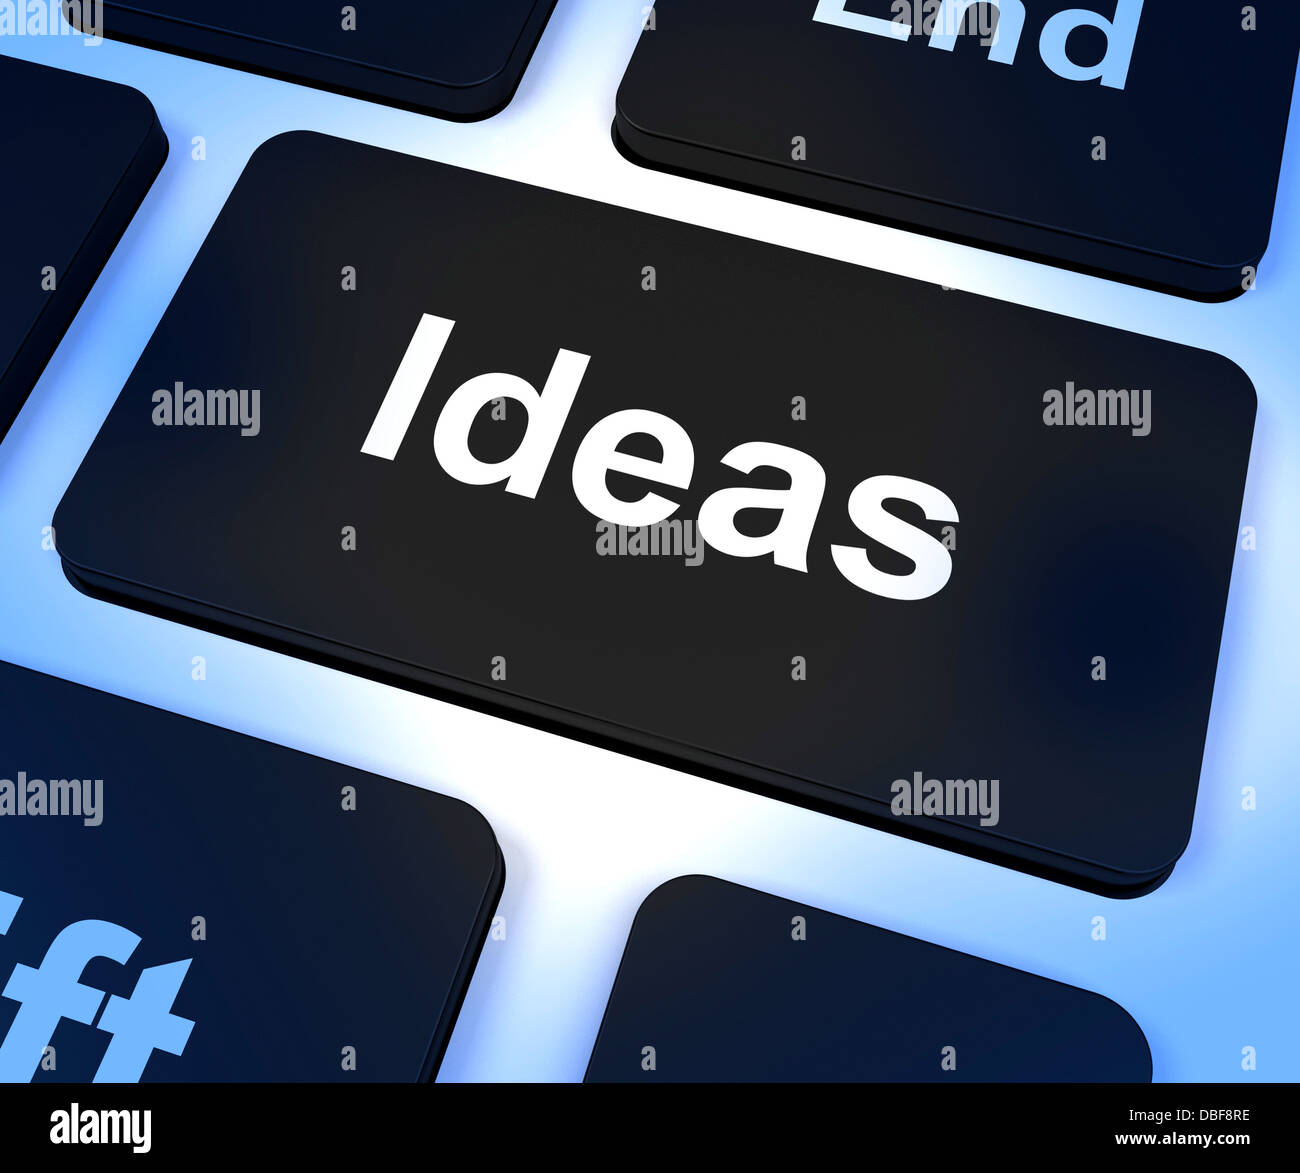 Ideas Computer Key Showing Concepts Or Creativity Stock Photo